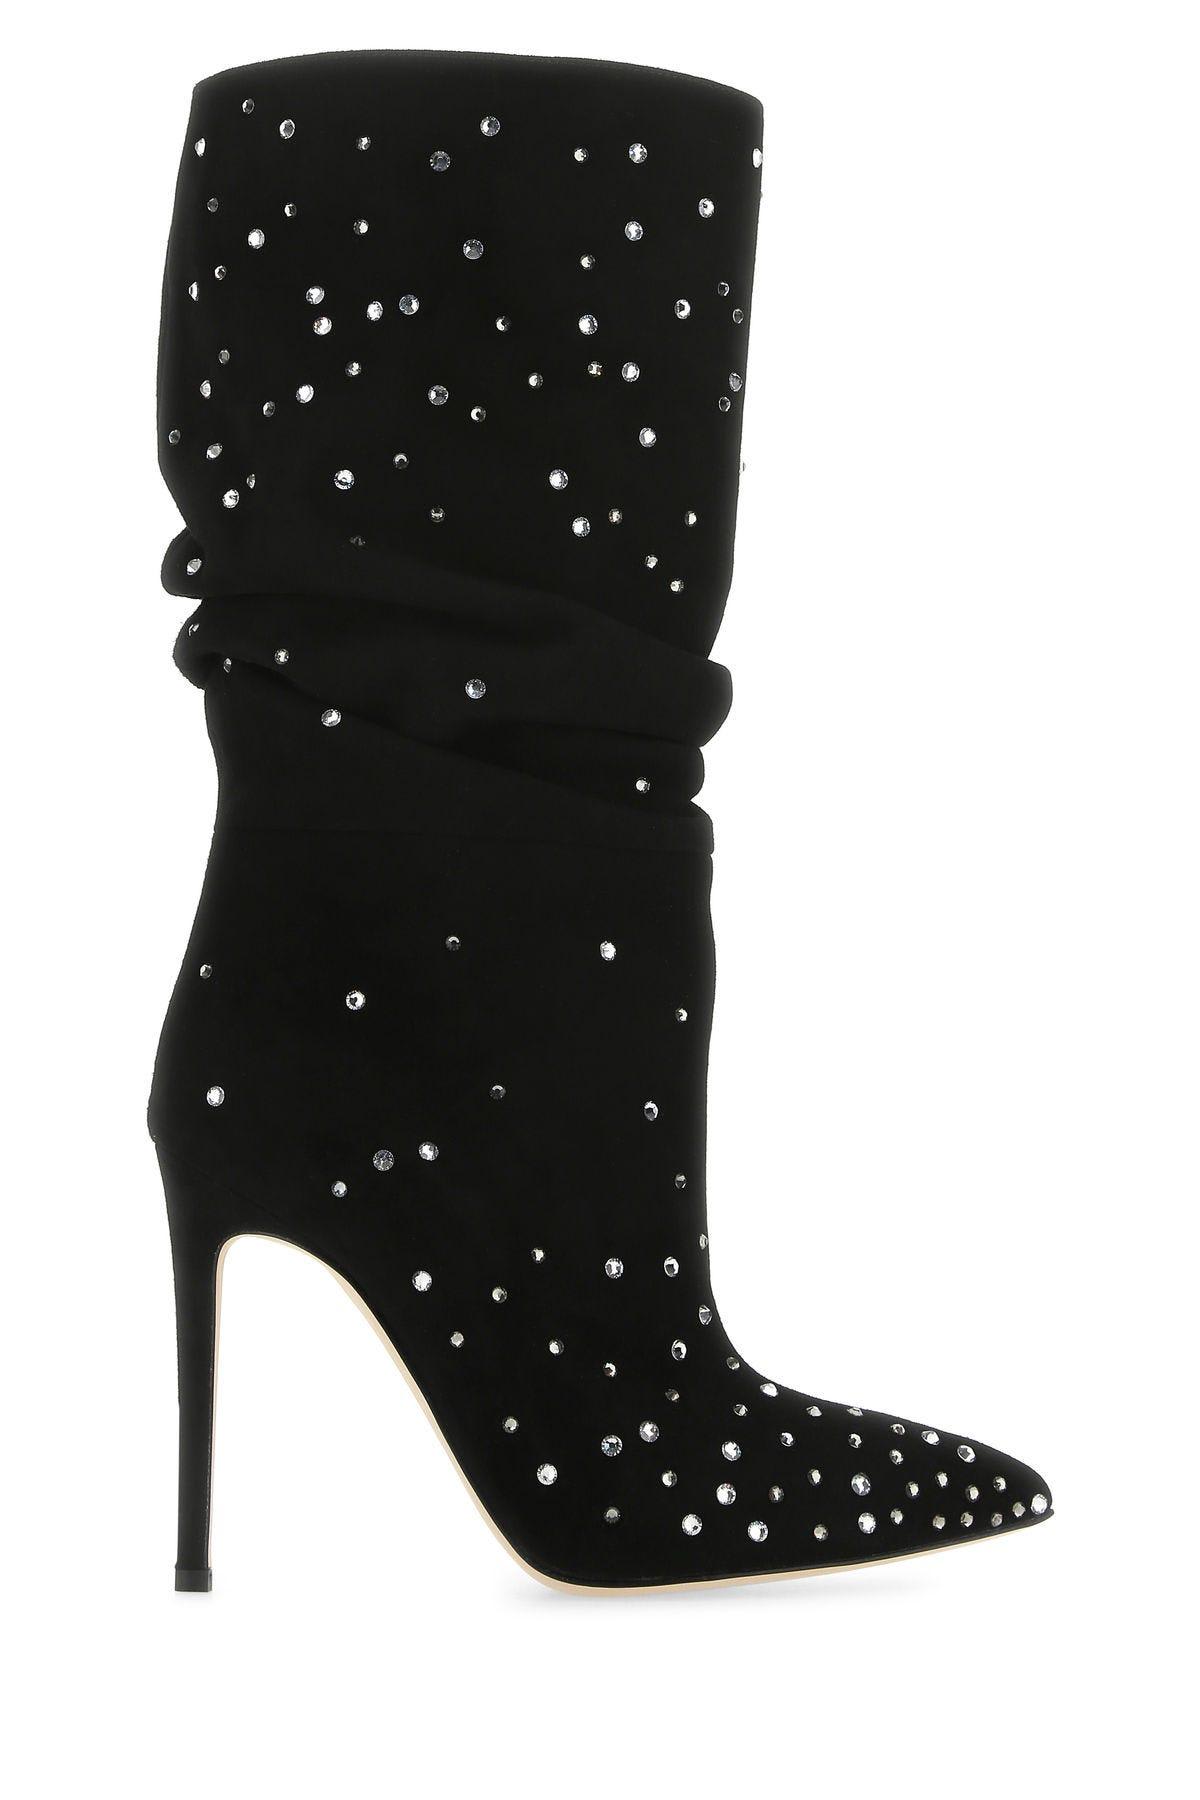 Paris Texas Embellished Suede Holly Boots